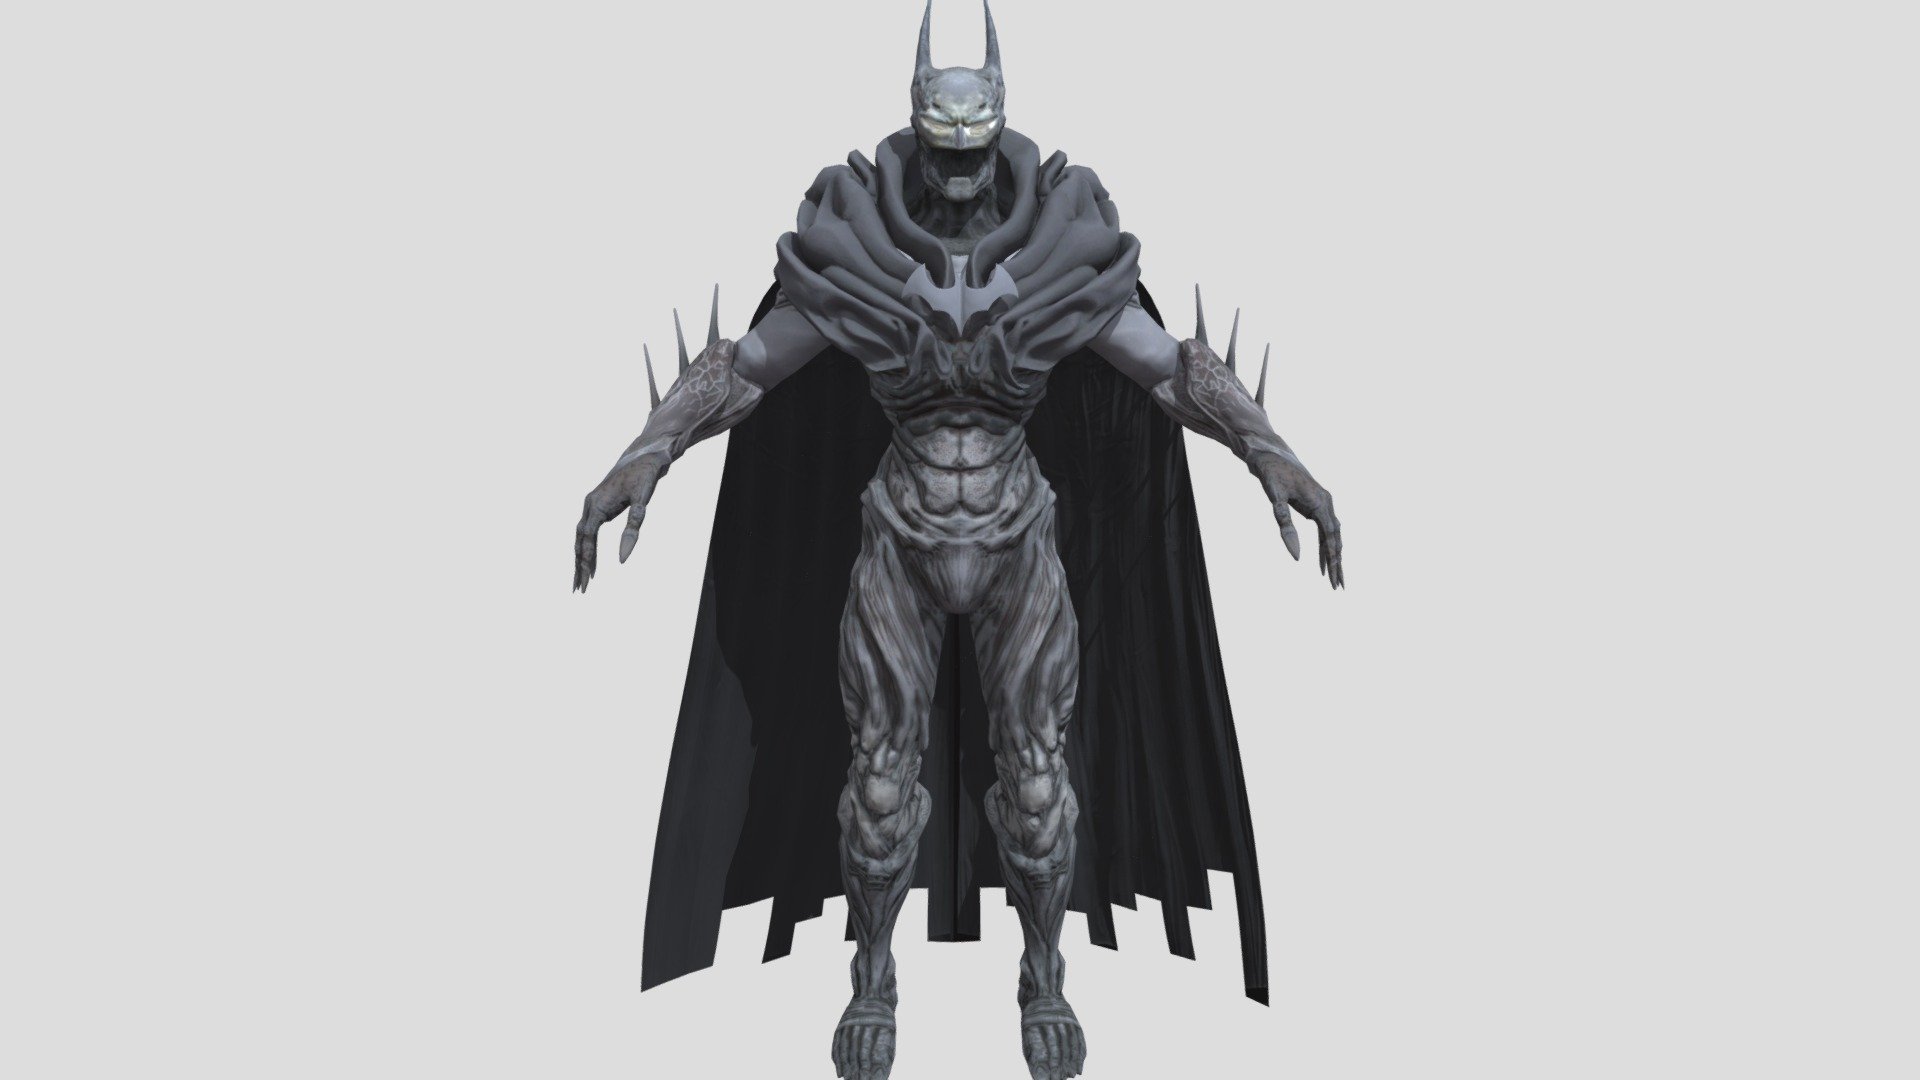 JOIN TELEGRAM TO DOWNLOAD : https://t.me/CAPTAAINROFFICIAL1

This is Batman Nightmare version you can download it and can use it on your animations

File Format : 
•FBX
•PNG - Batman Nightmare - 3D model by CAPTAAINR 3d model